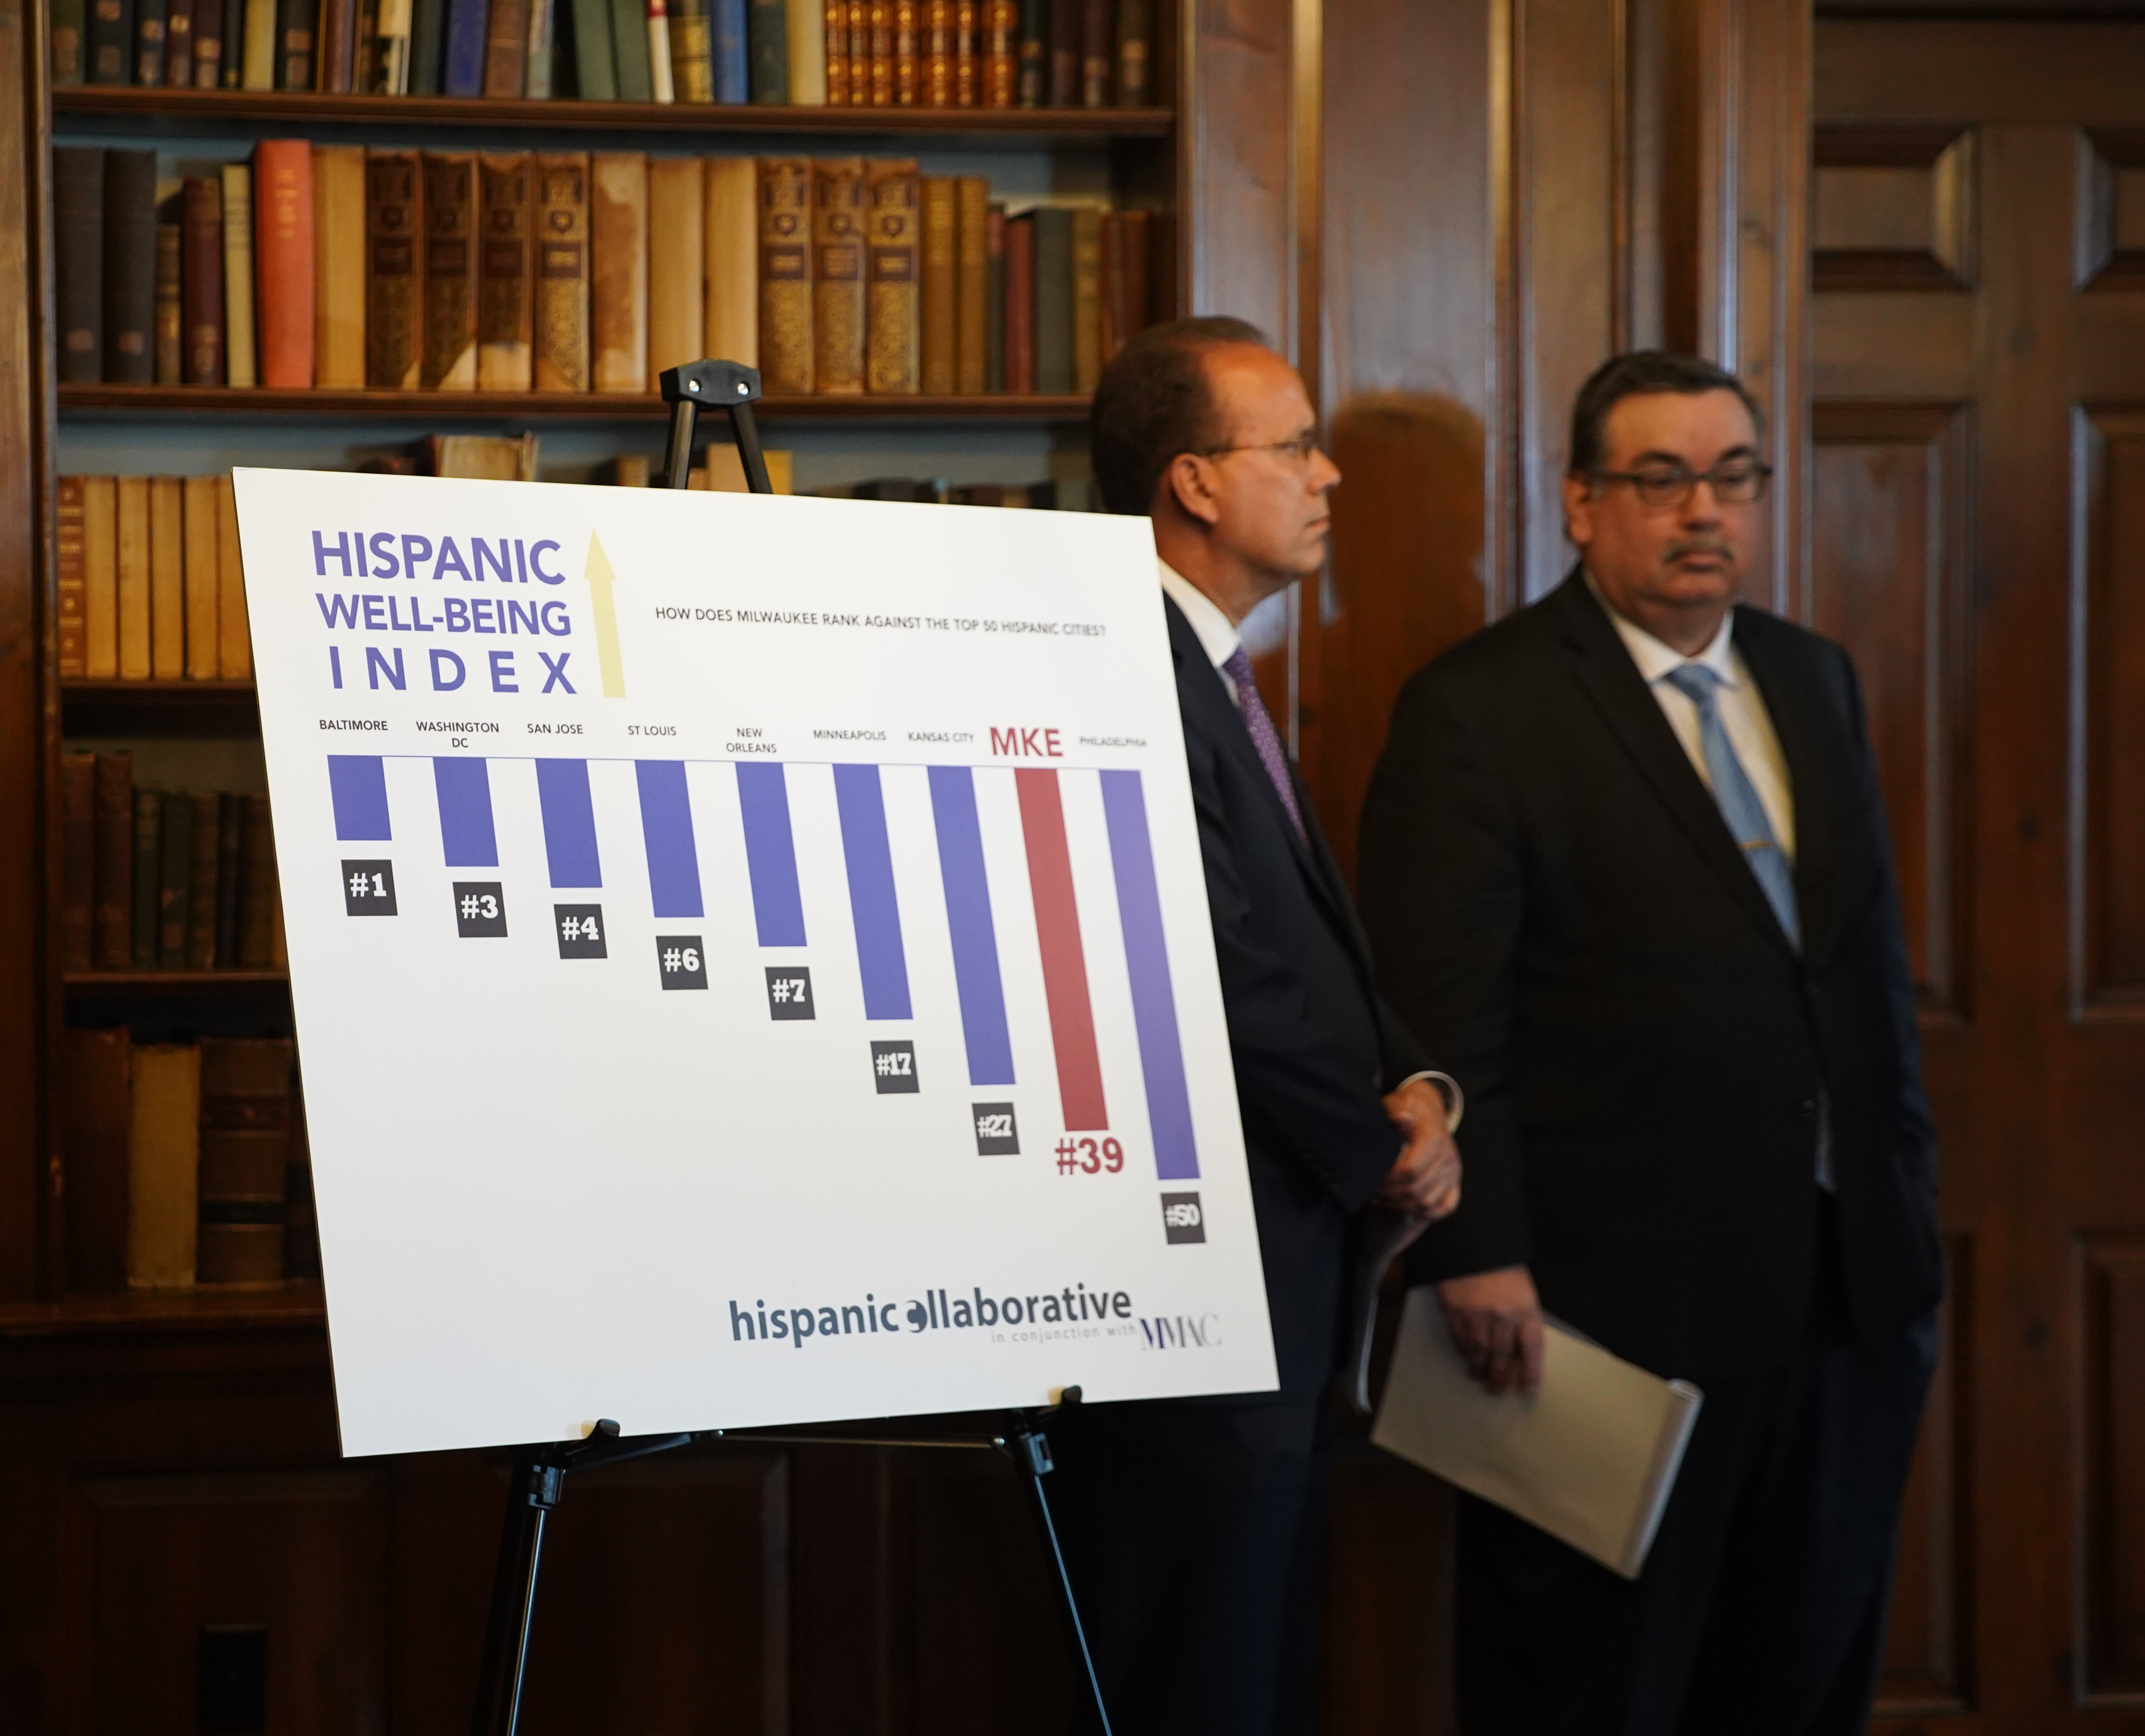 Hispanic Well-being Index sign